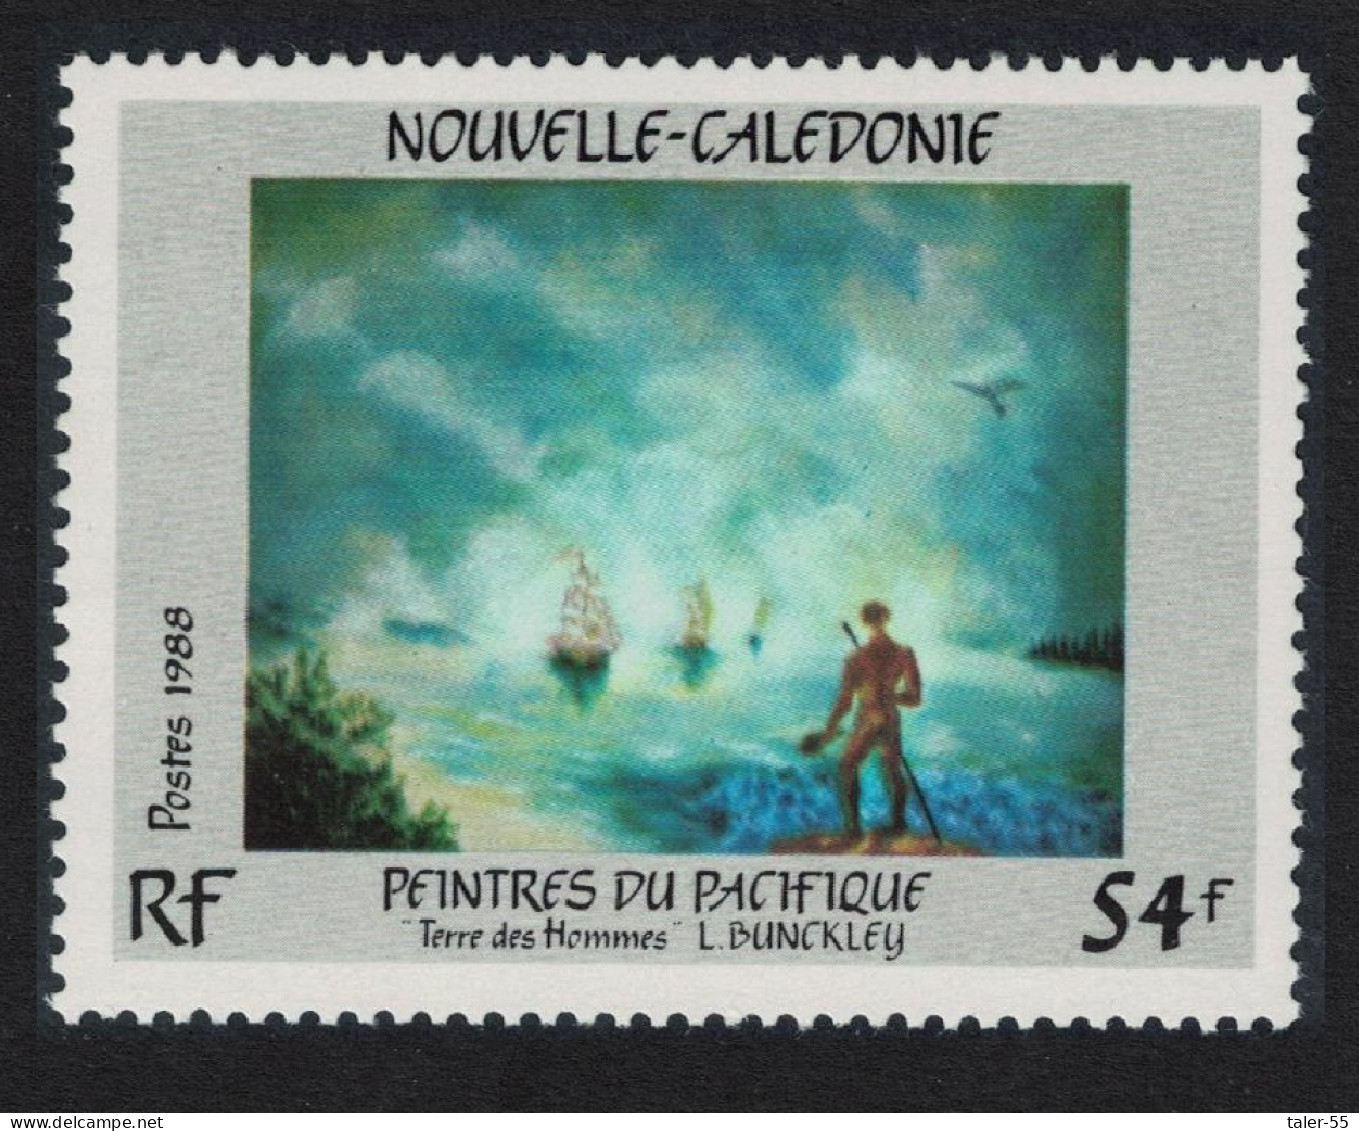 New Caledonia 'Terre Des Hommes' Painting By L. Bunckley 1988 MNH SG#852 - Nuevos